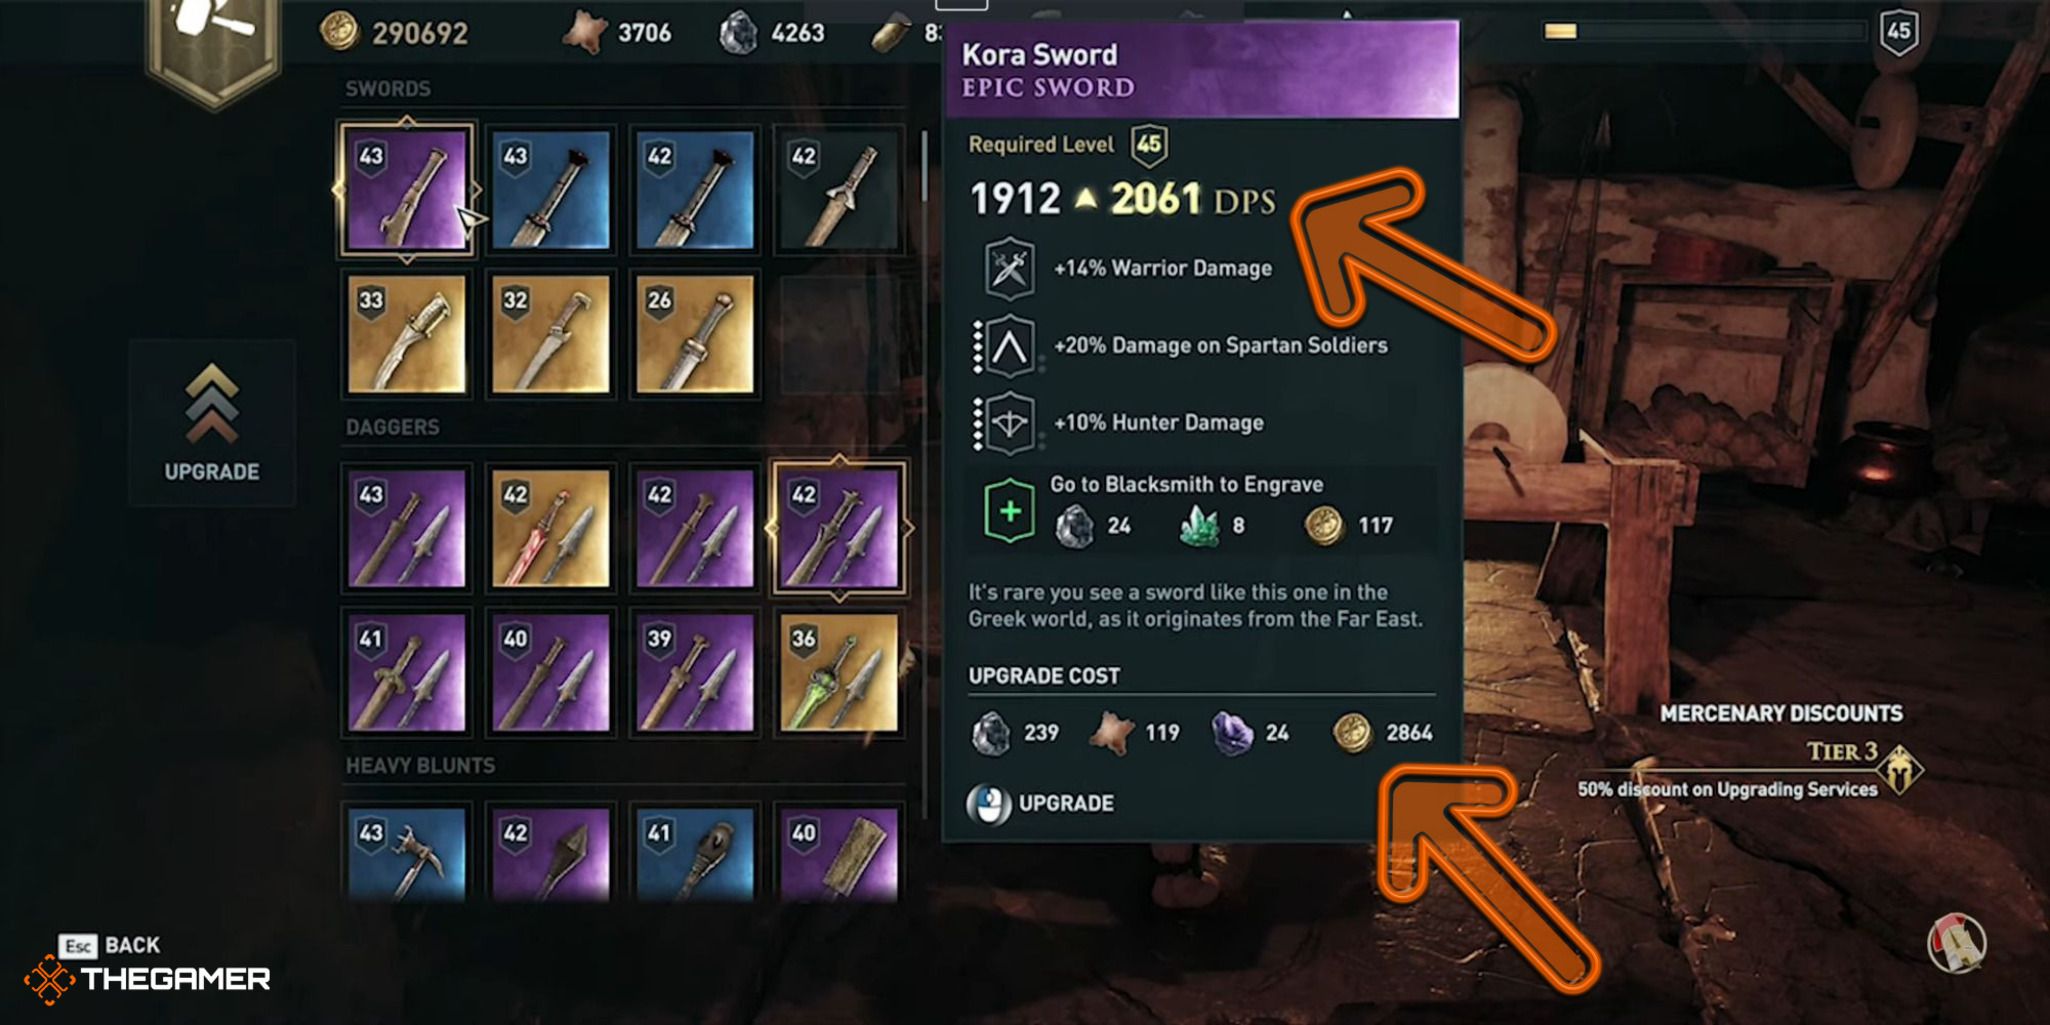 A screenshot showing the Epic weapon Kora Sword and its upgrade costs.